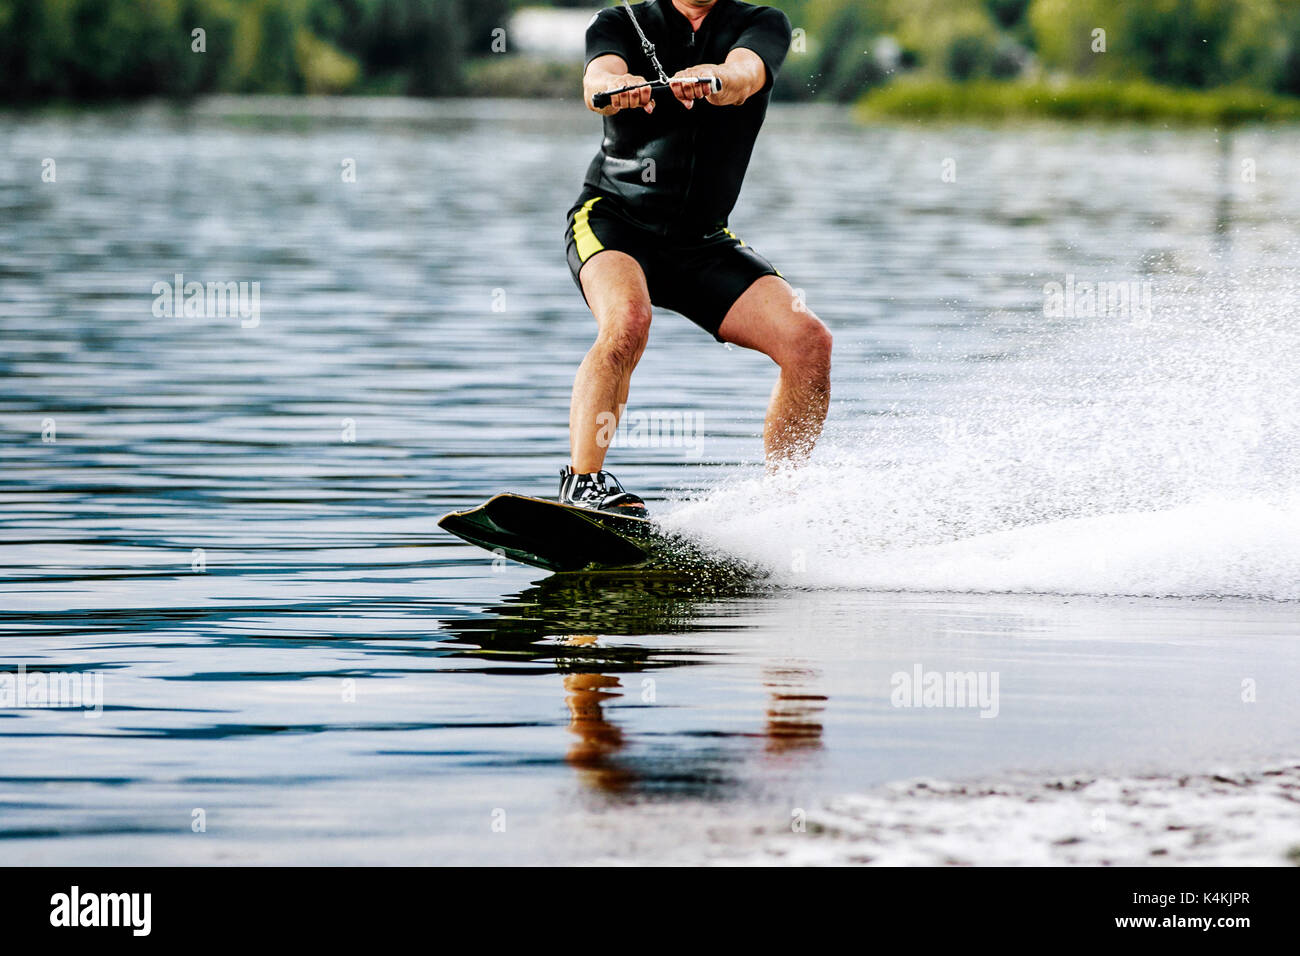 extreme sports man rides a wakeboard on lake Stock Photo